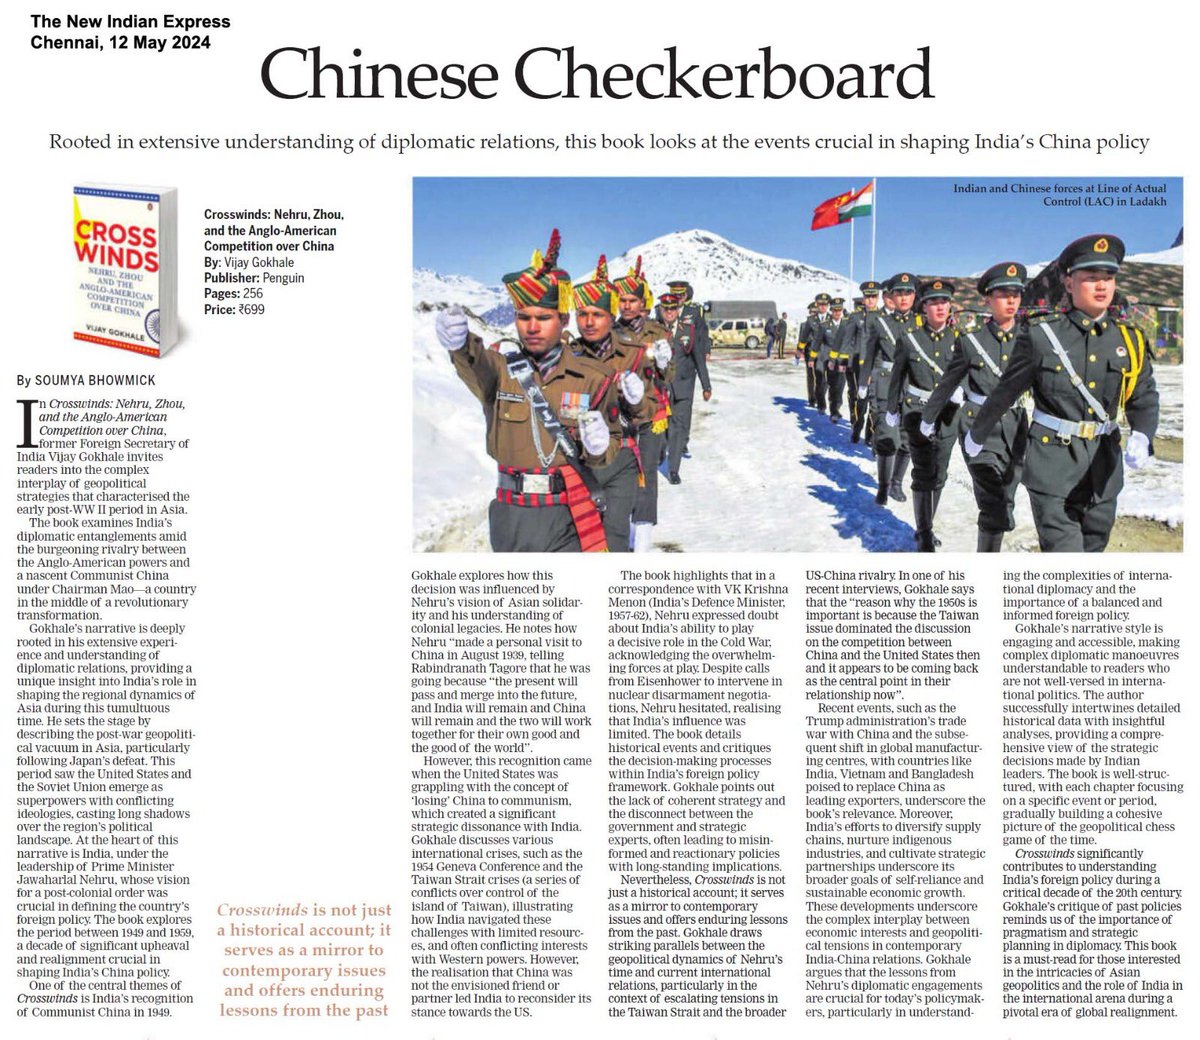 Most recent review of my latest book ‘Crosswinds - Nehru, Zhou and the Anglo American Competition over China’ published by @PenguinIndia